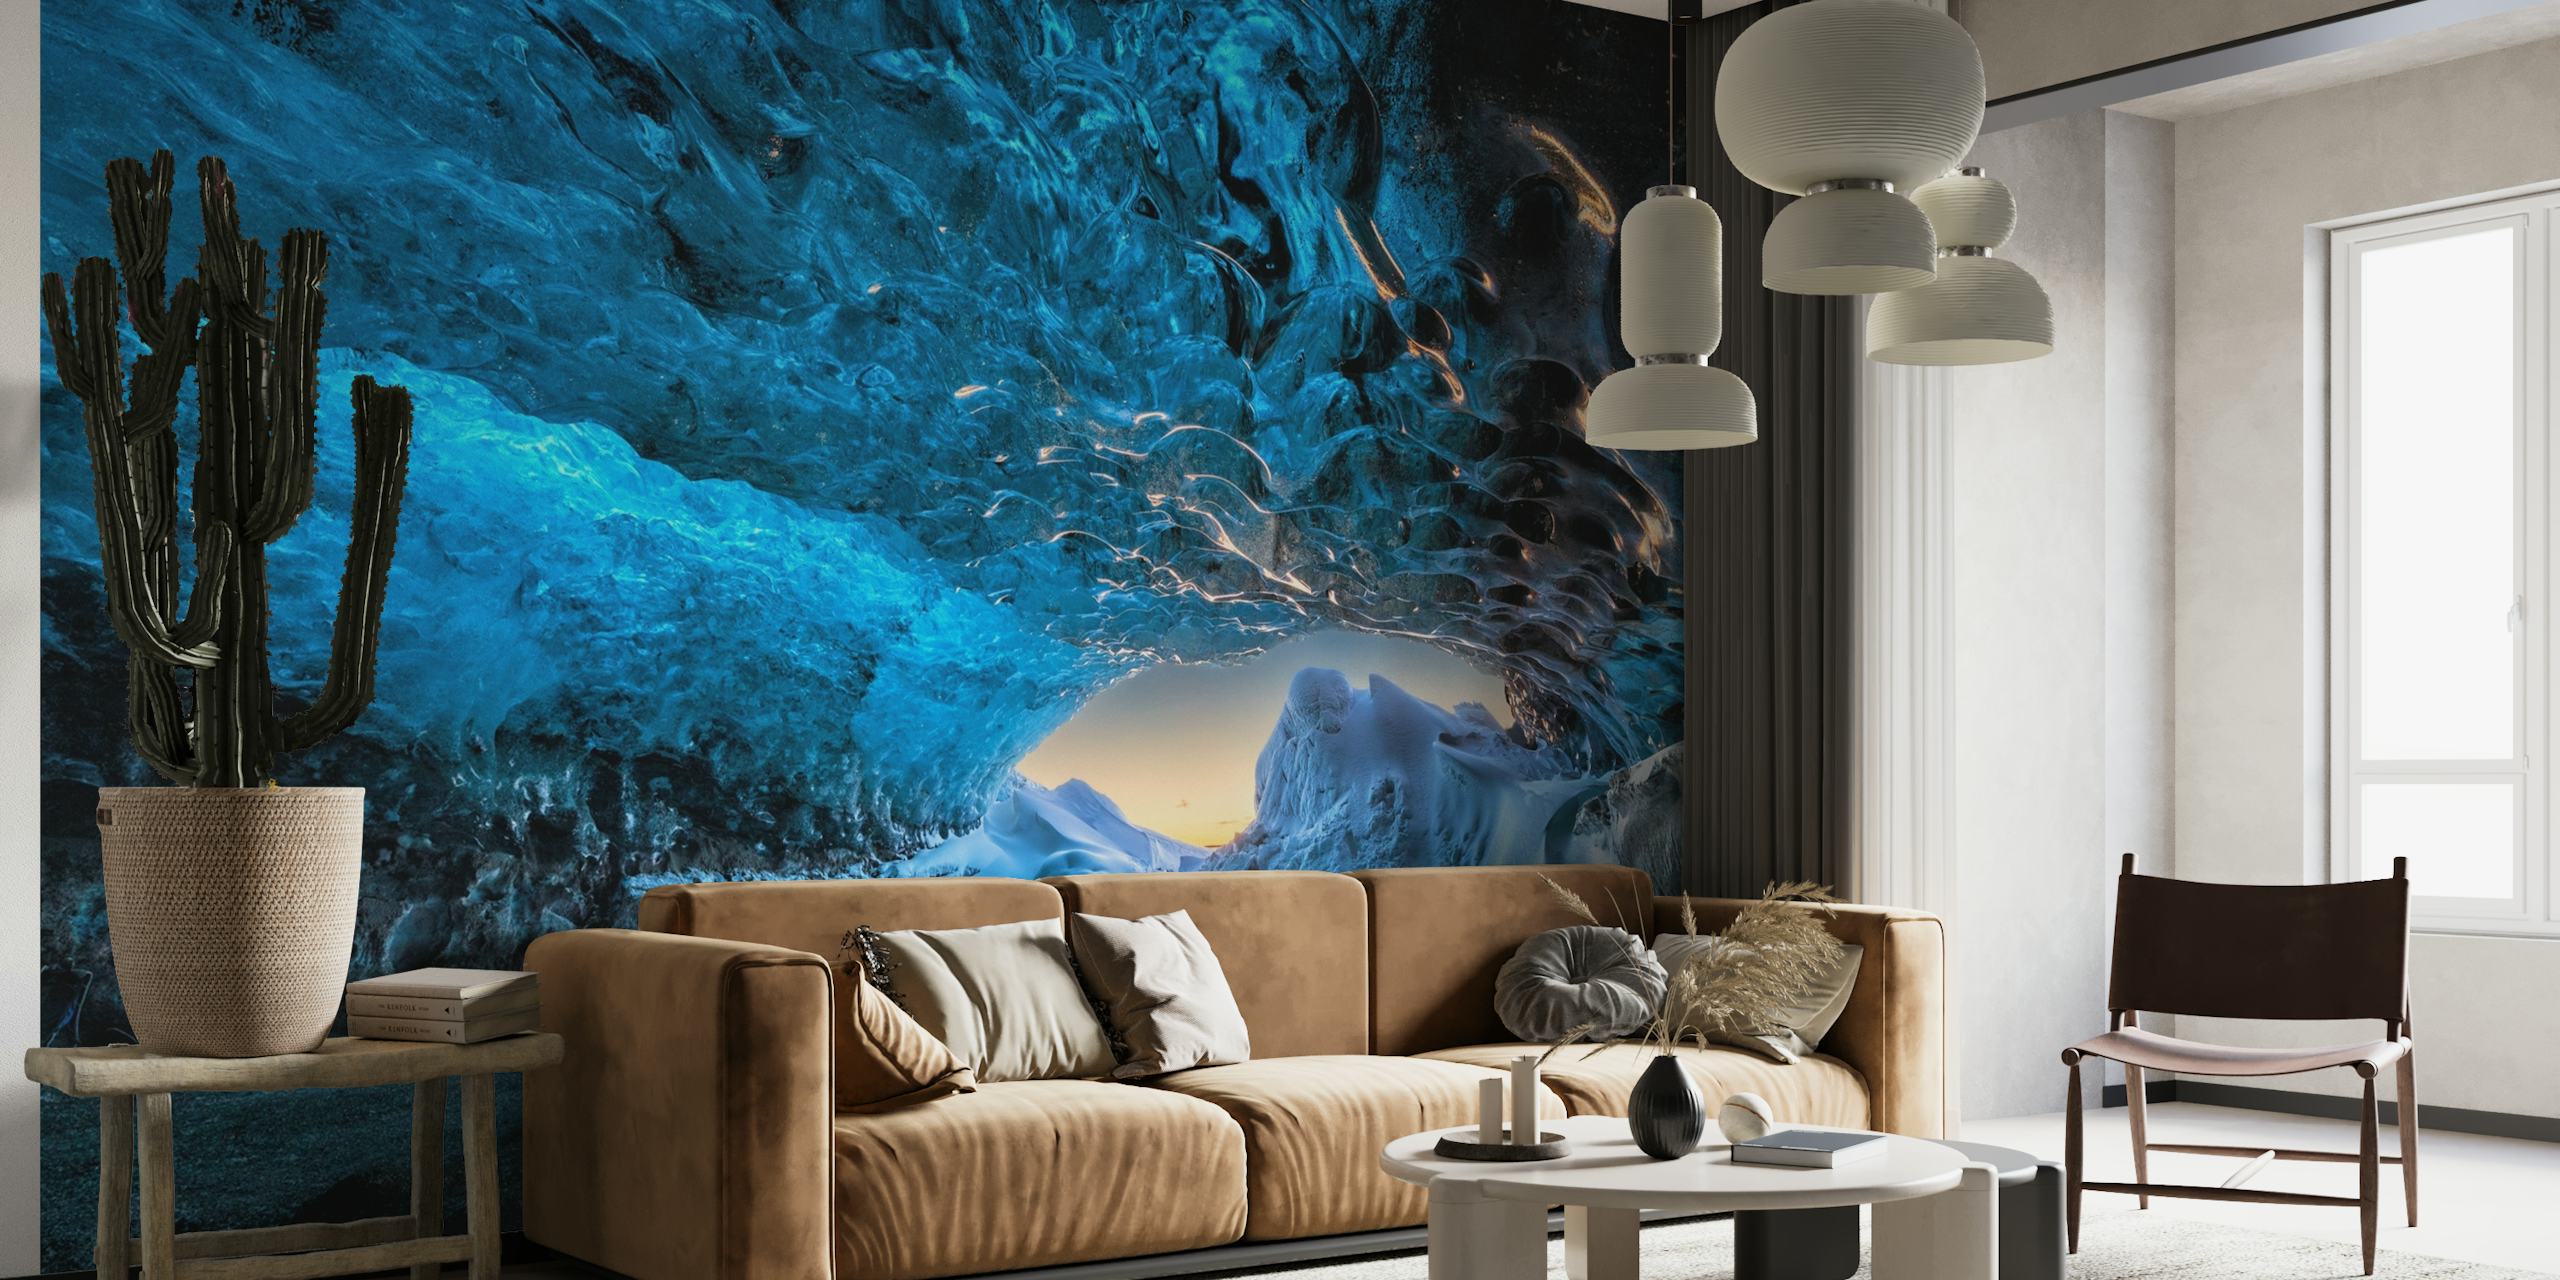 3D image of Crystal cave wallpaper displaying natural cave features